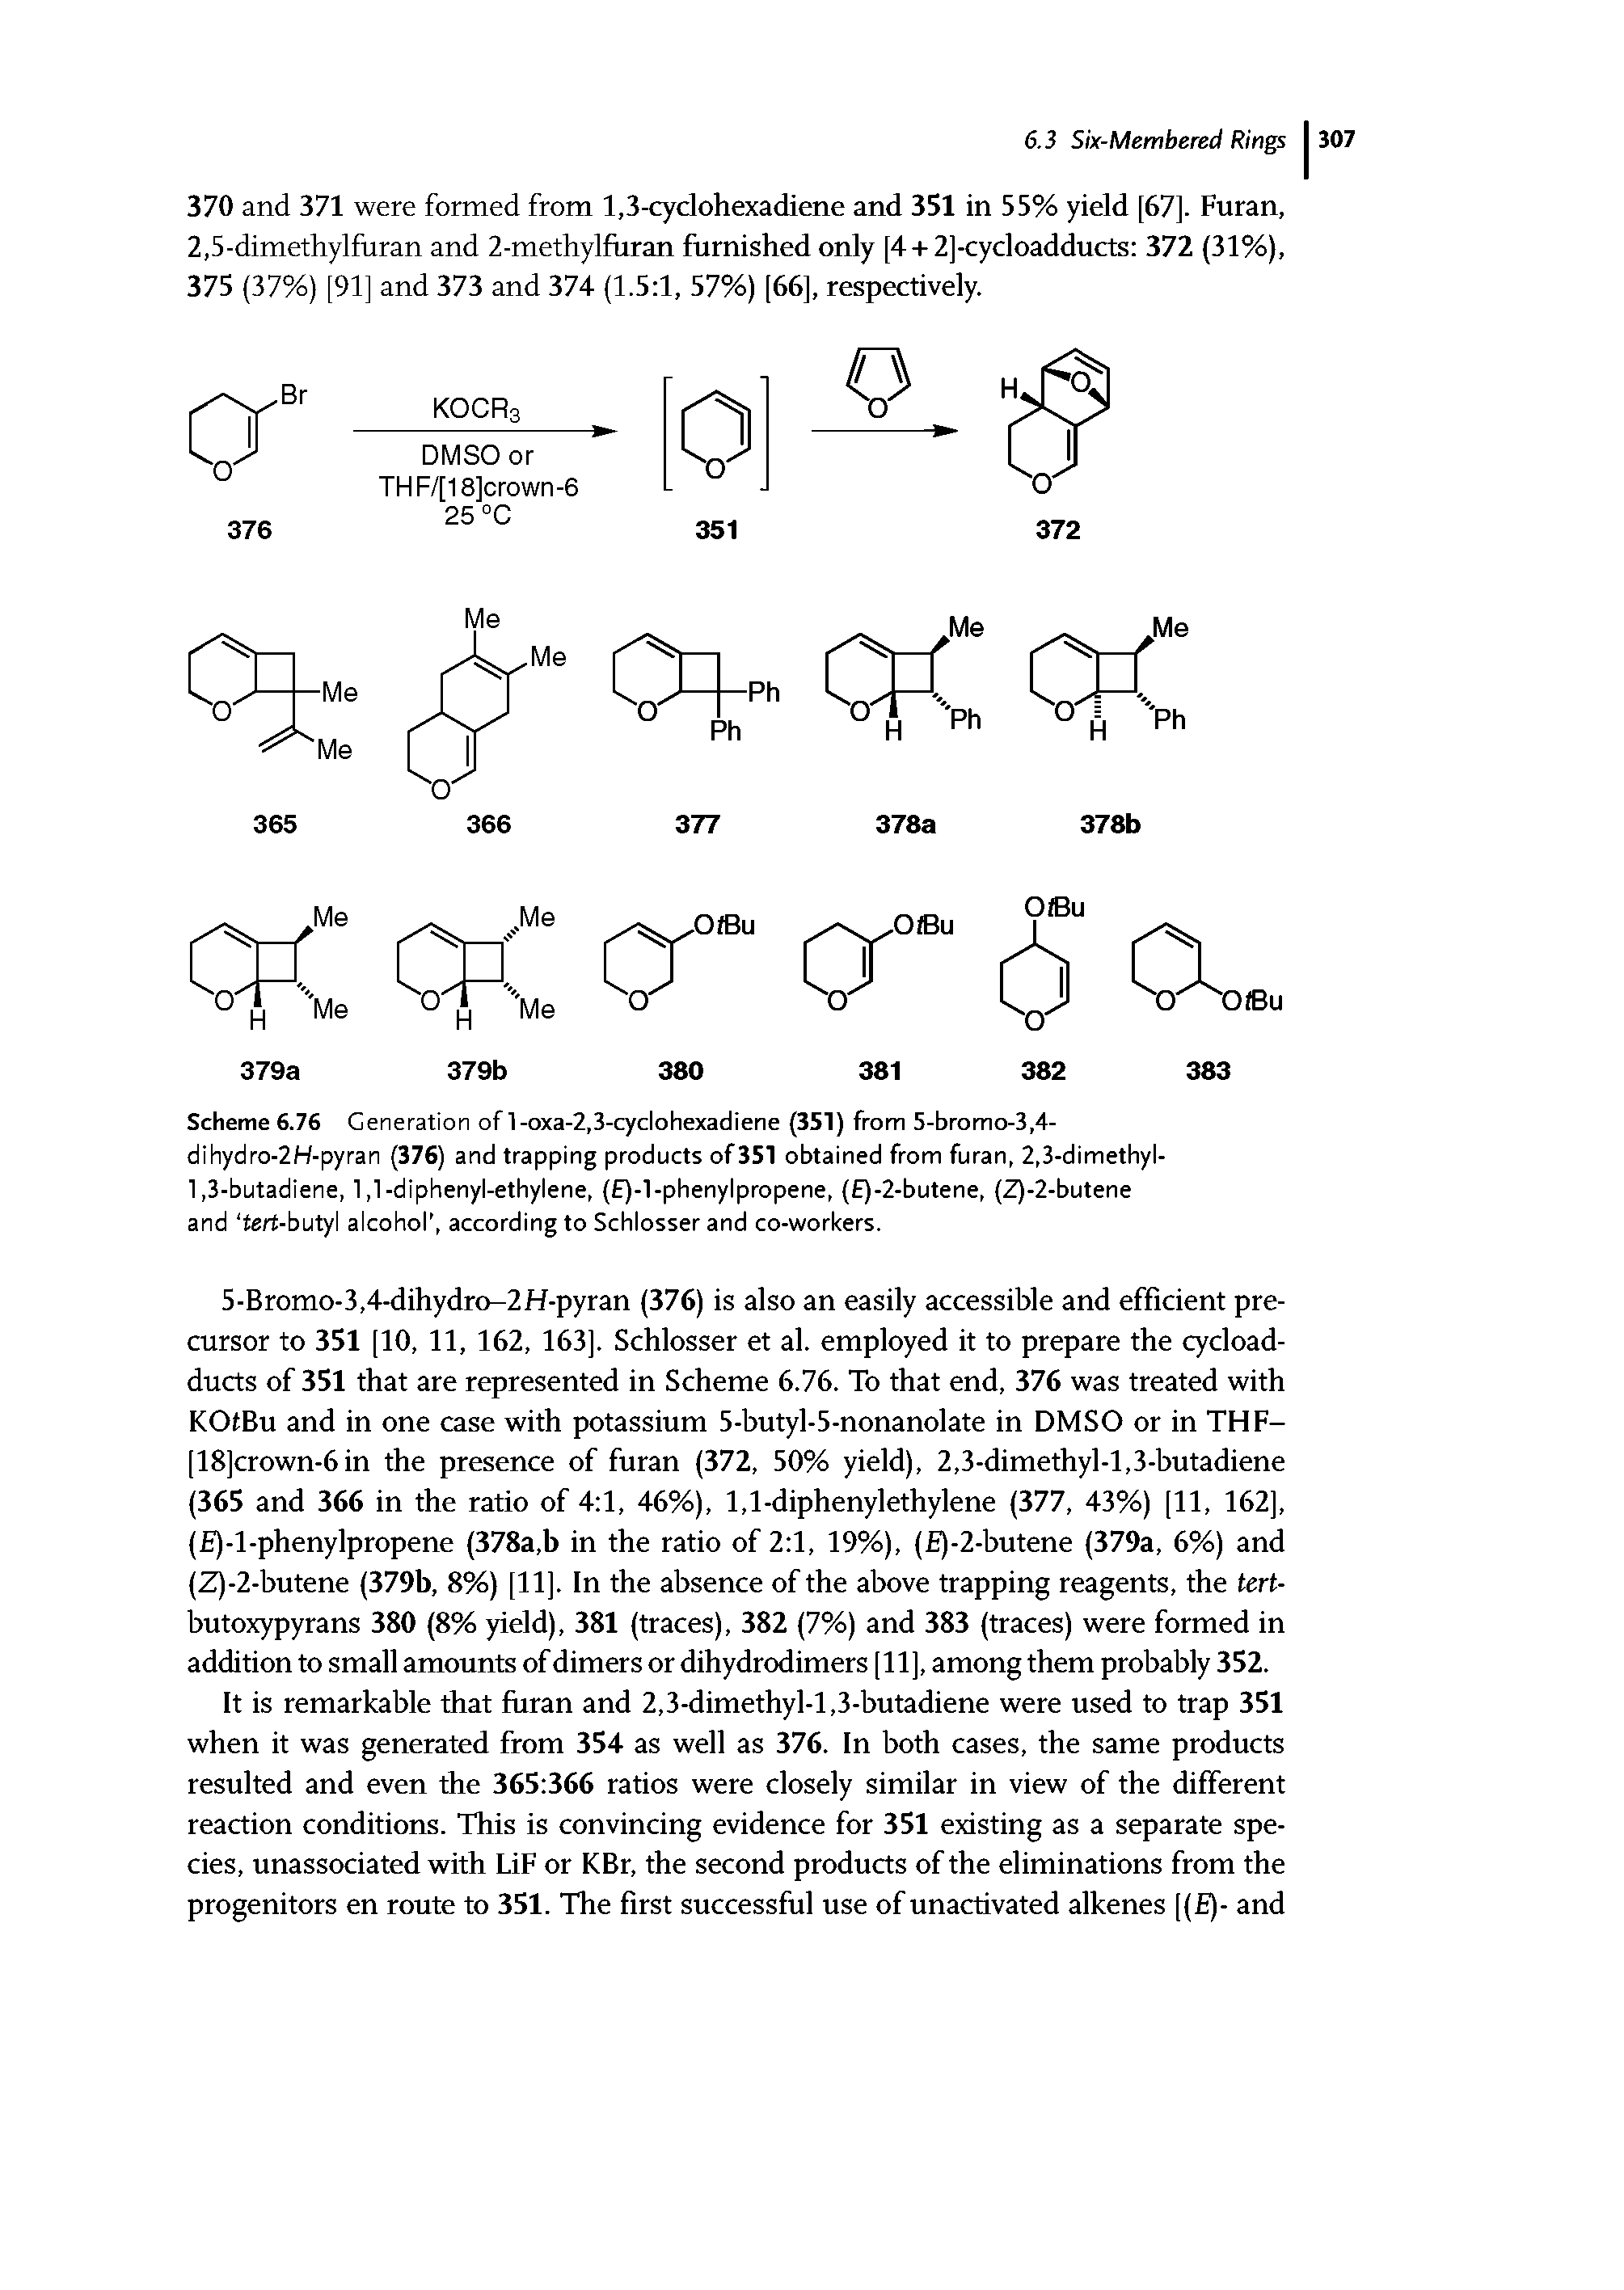 Scheme 6.76 Generation of l-oxa-2,3-cyclohexadiene (351) from 5-bromo-3,4-dihydro-2H-pyran (376) and trapping products of351 obtained from furan, 2,3-dimethyl-1,3-butadiene, 1,1-diphenyl-ethylene, ( )-l-phenylpropene, ( )-2-butene, (Z)-2-butene and tert-butyl alcohol , according to Schlosserand co-workers.